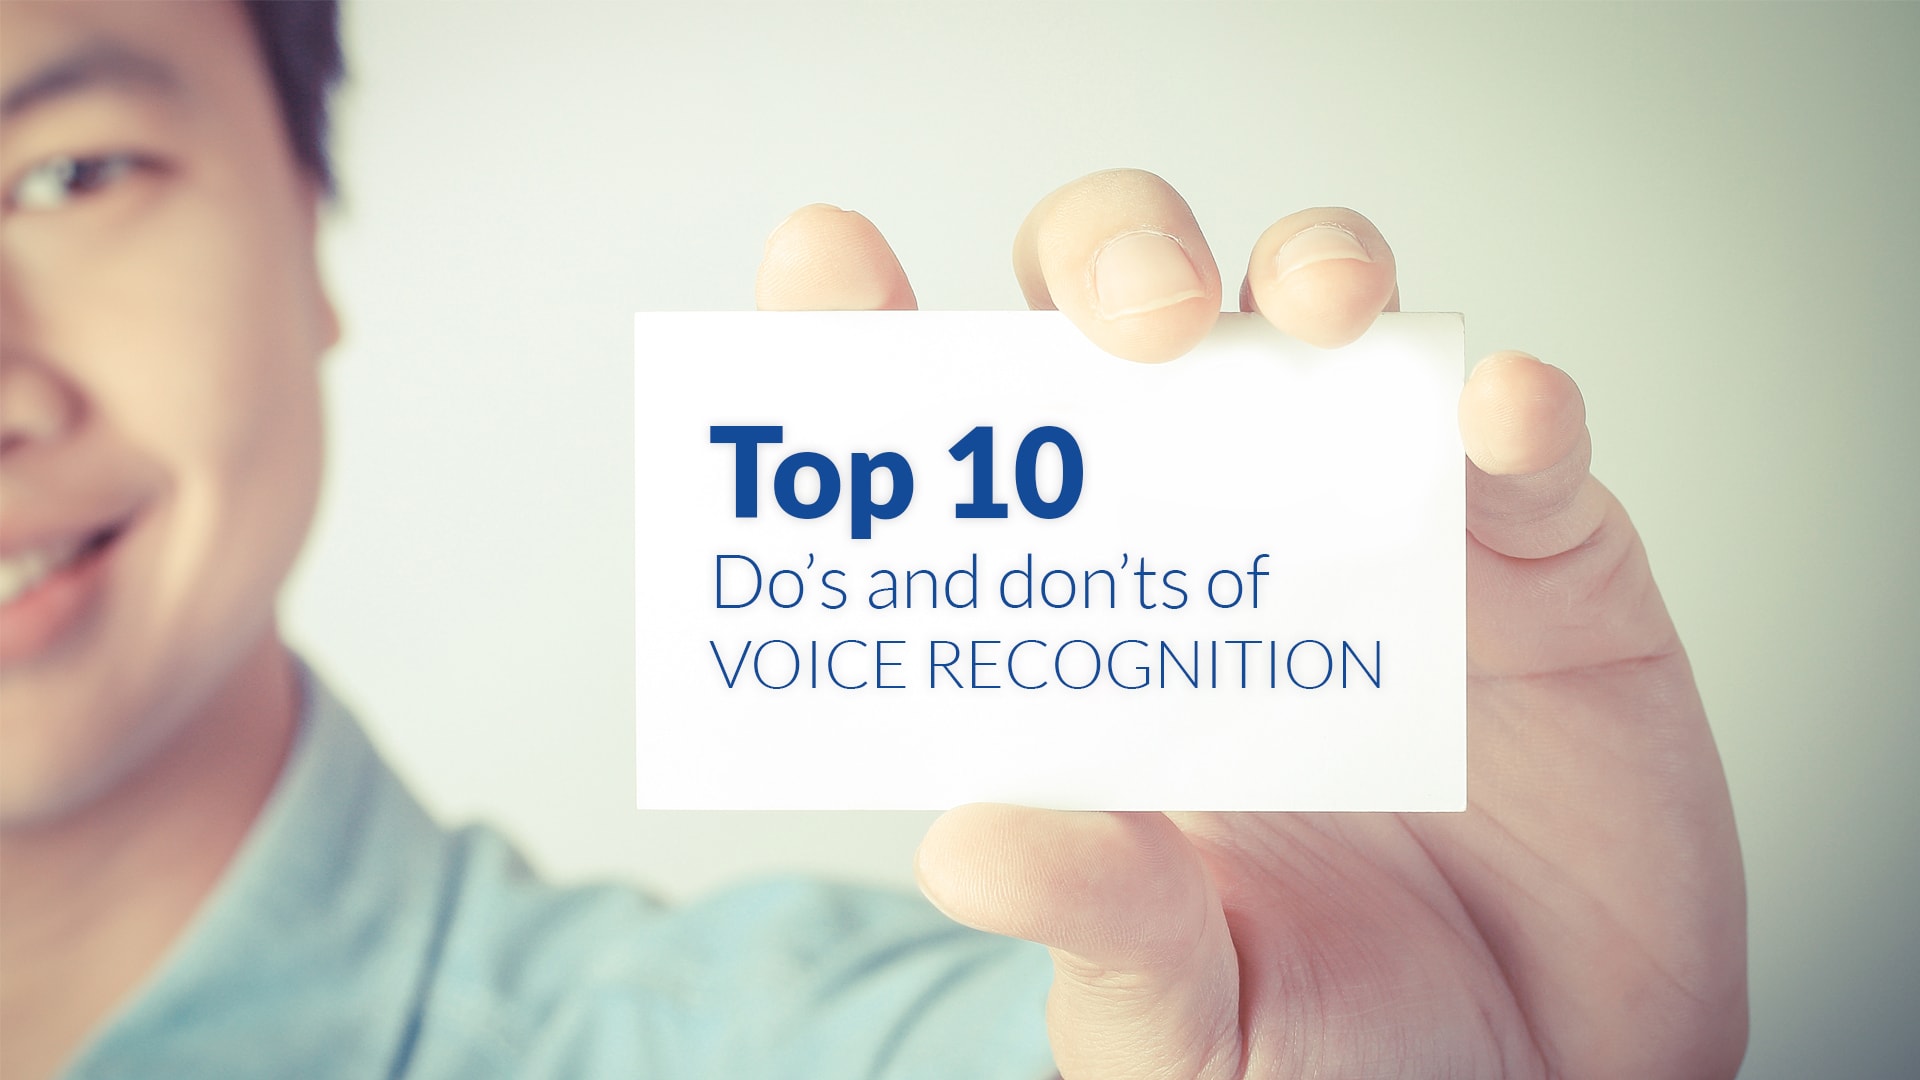 A solicitor’s guide to the top 10 do’s and don’ts of voice recognition - News